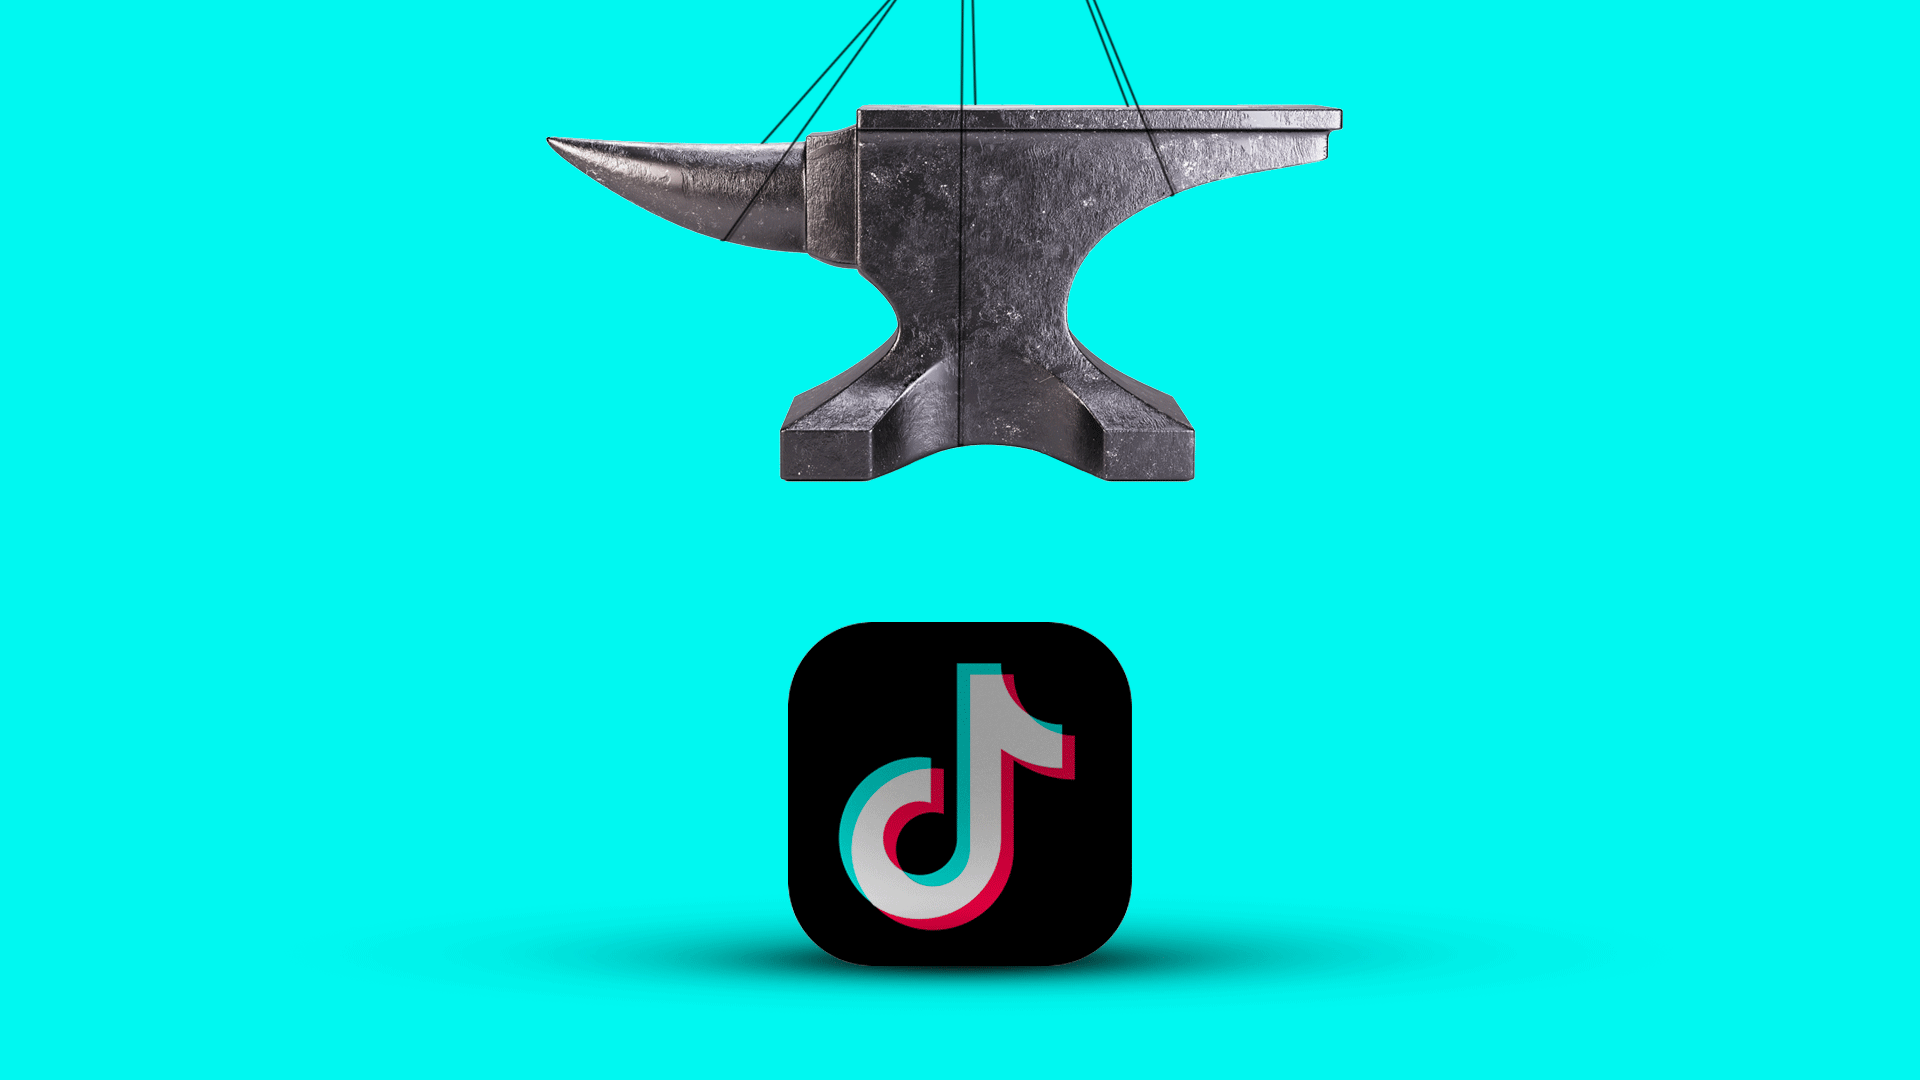 Illustration of an anvil swaying back and forth above the TikTok app icon.